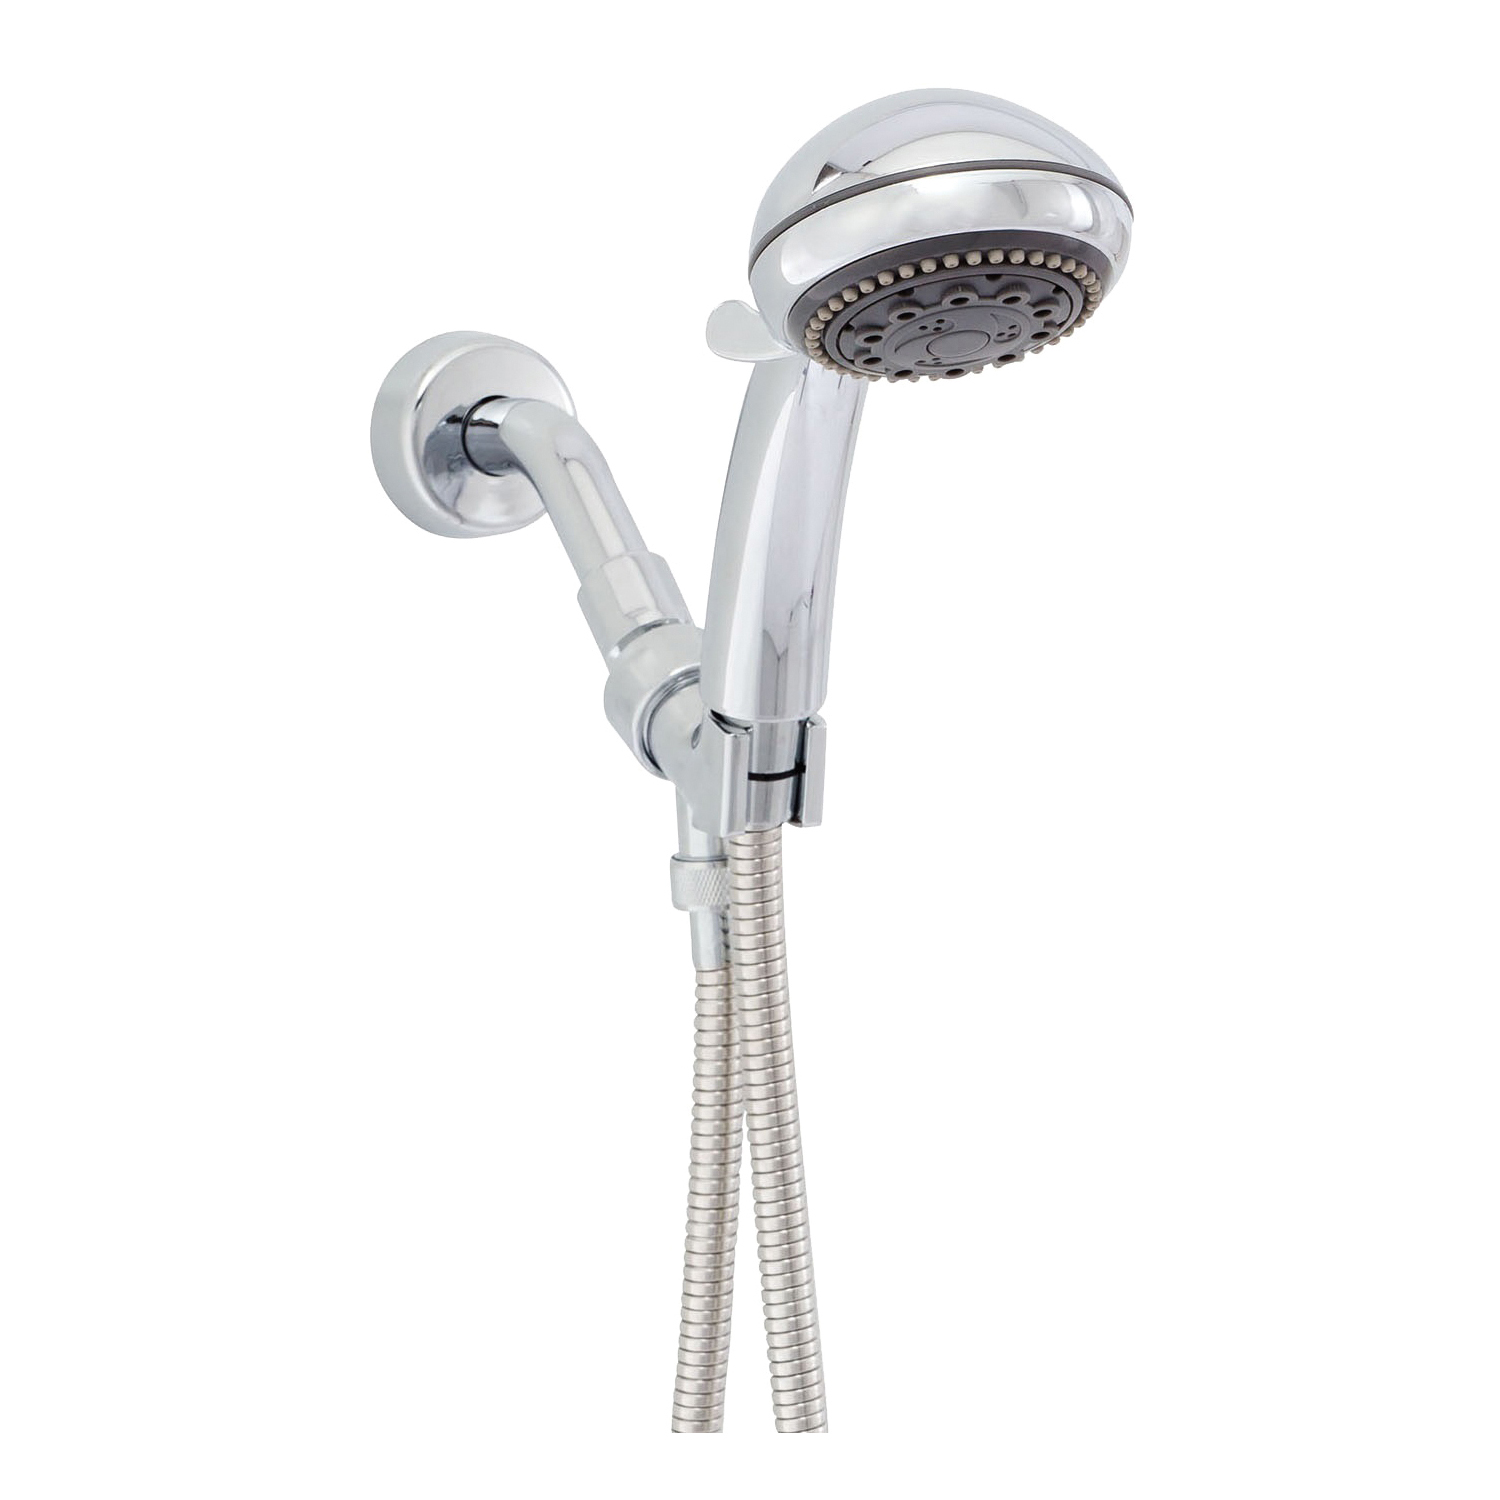 Champagne Massage AFP6C Hand Shower, 2.5 gpm, 7-Spray Function, Chrome, 80 in L Hose